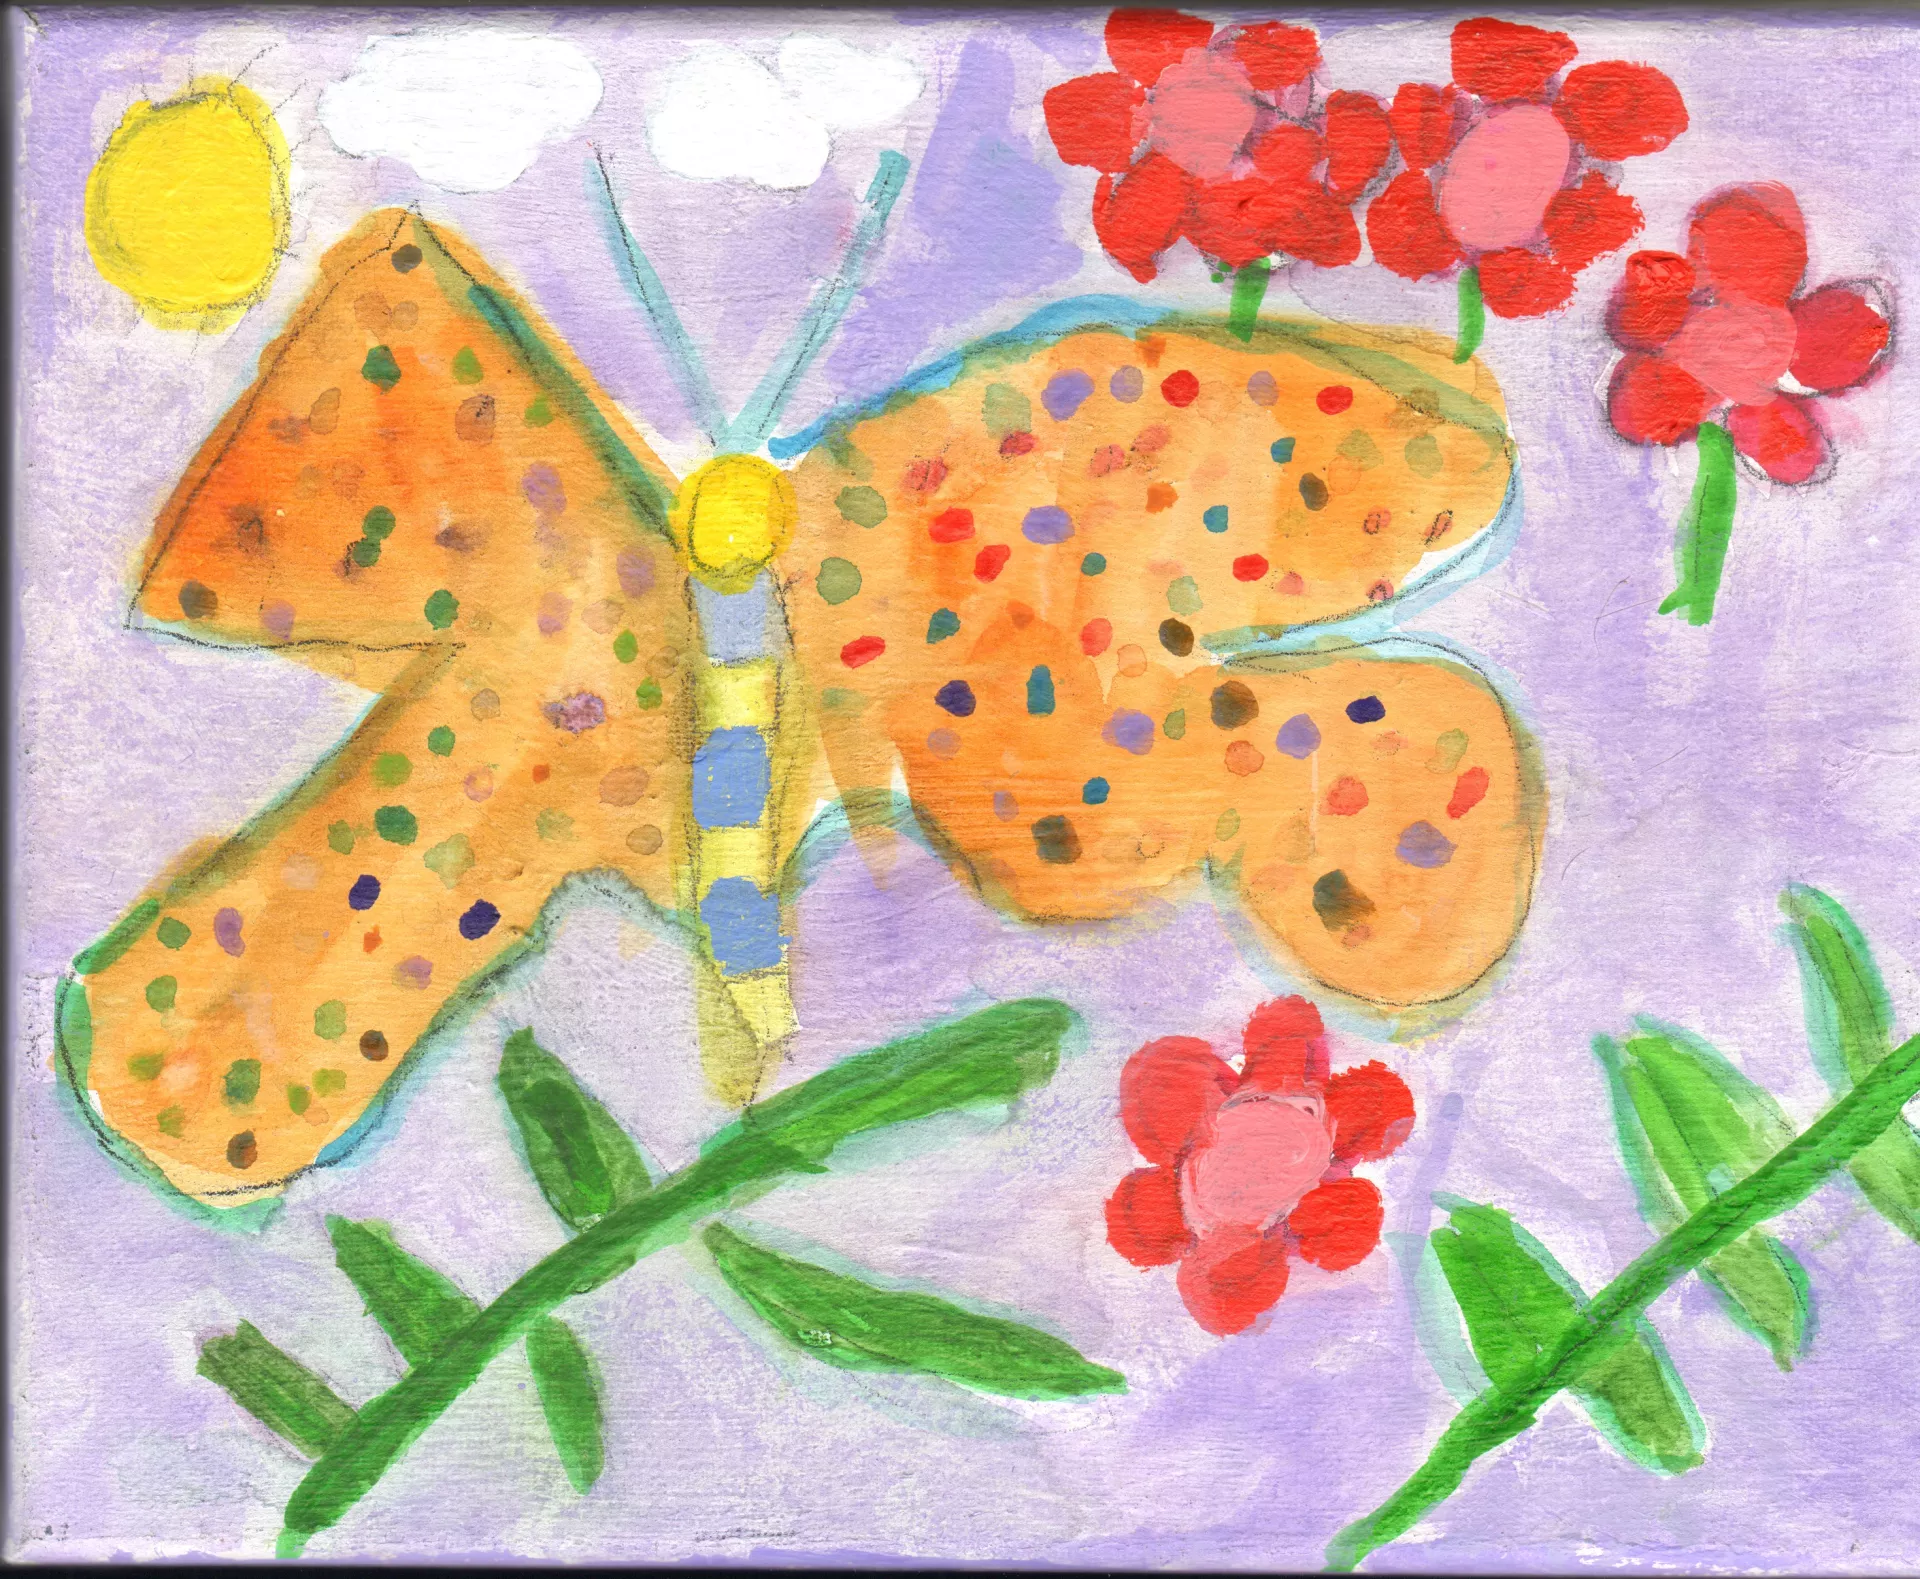 Michael Bleviss Butterflyland, 2022 An orange butterfly, red flowers, green leaves with stems, and a yellow sun against a purple background.  Mixed media on canvas, 8"x10"